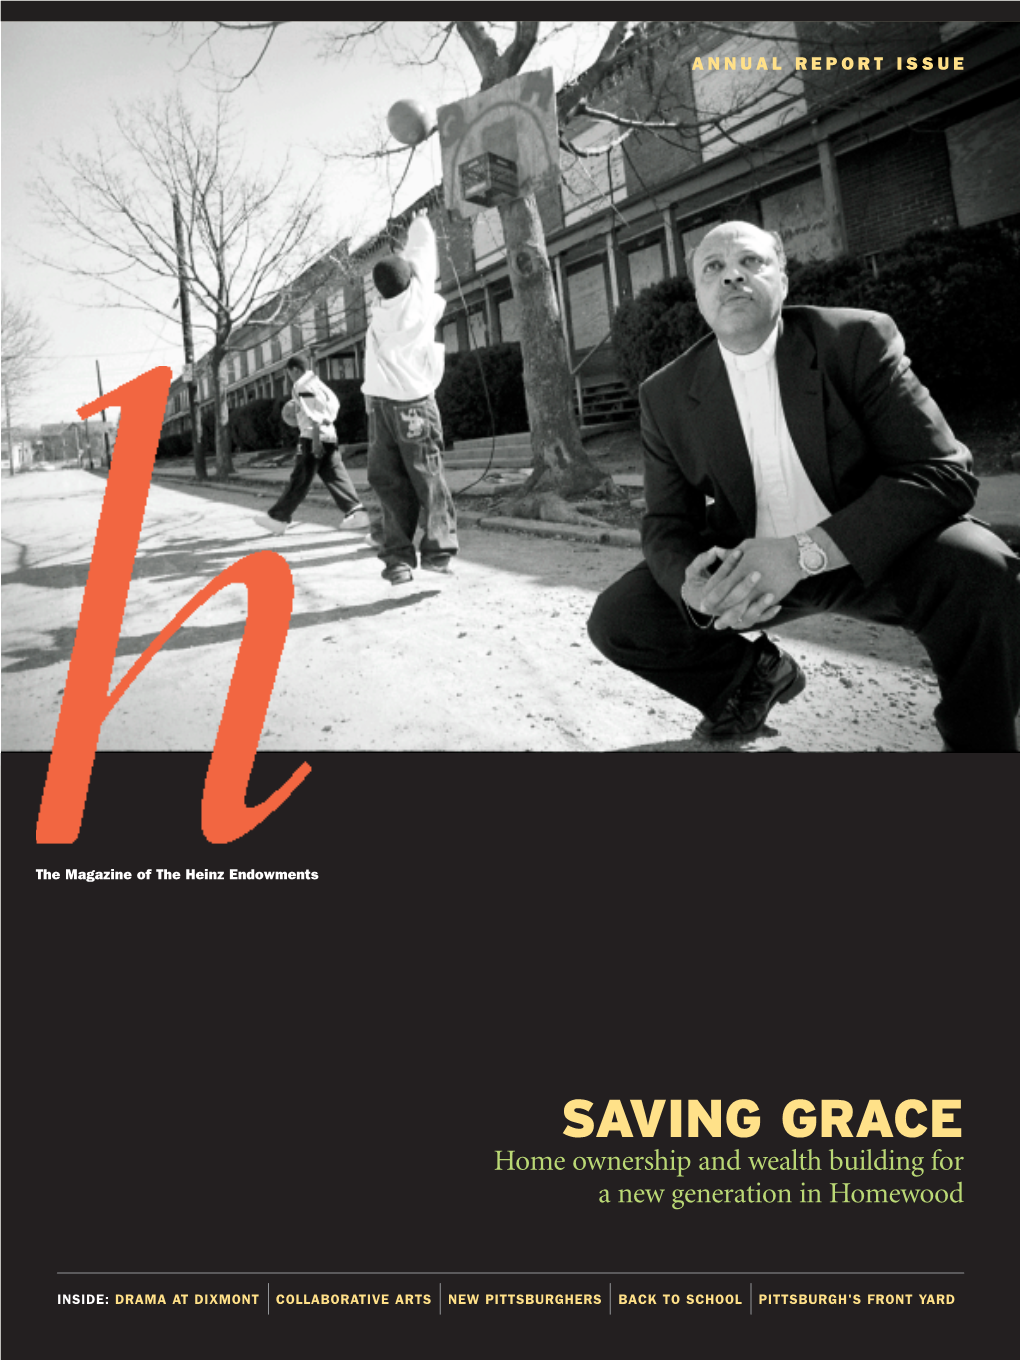 SAVING GRACE Home Ownership and Wealth Building for a New Generation in Homewood